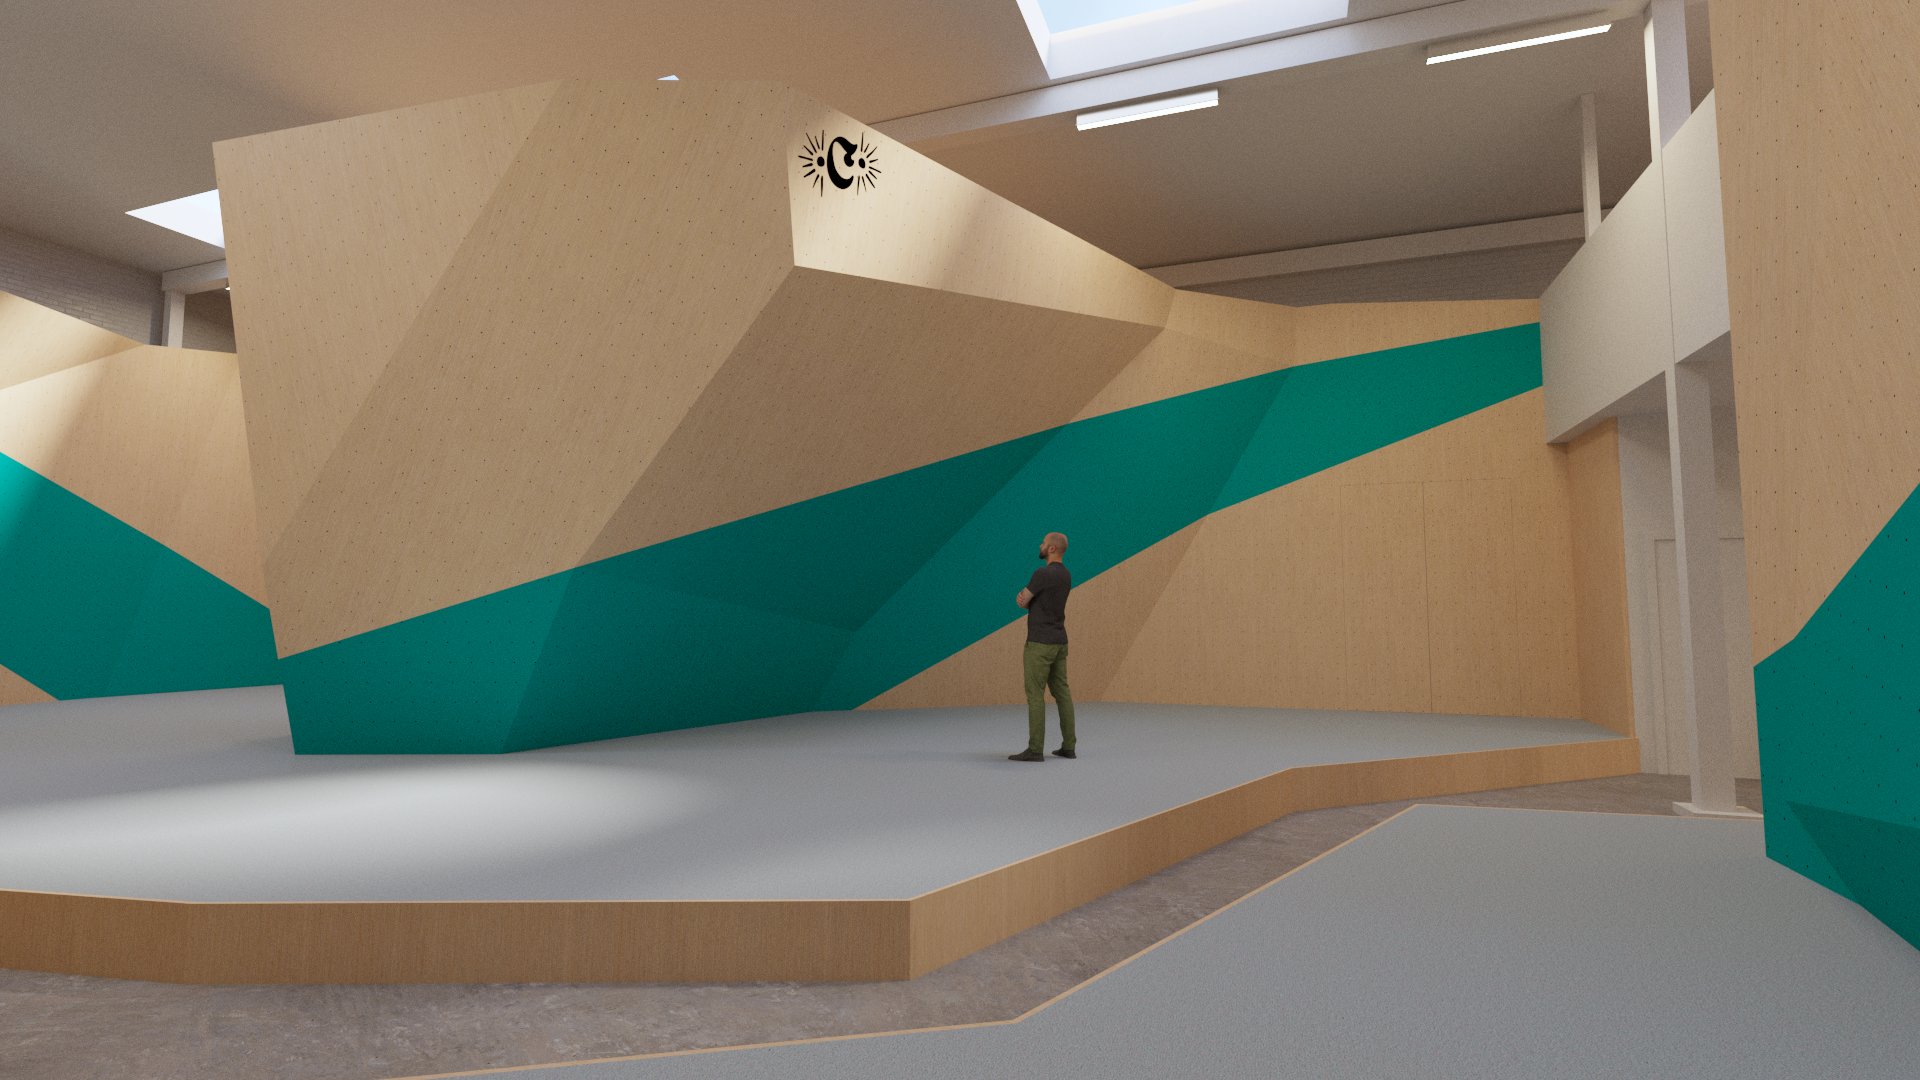 Render of California Climbing Collective (CCC) gym build by ICP. The render has wood coloured walls with green design features.